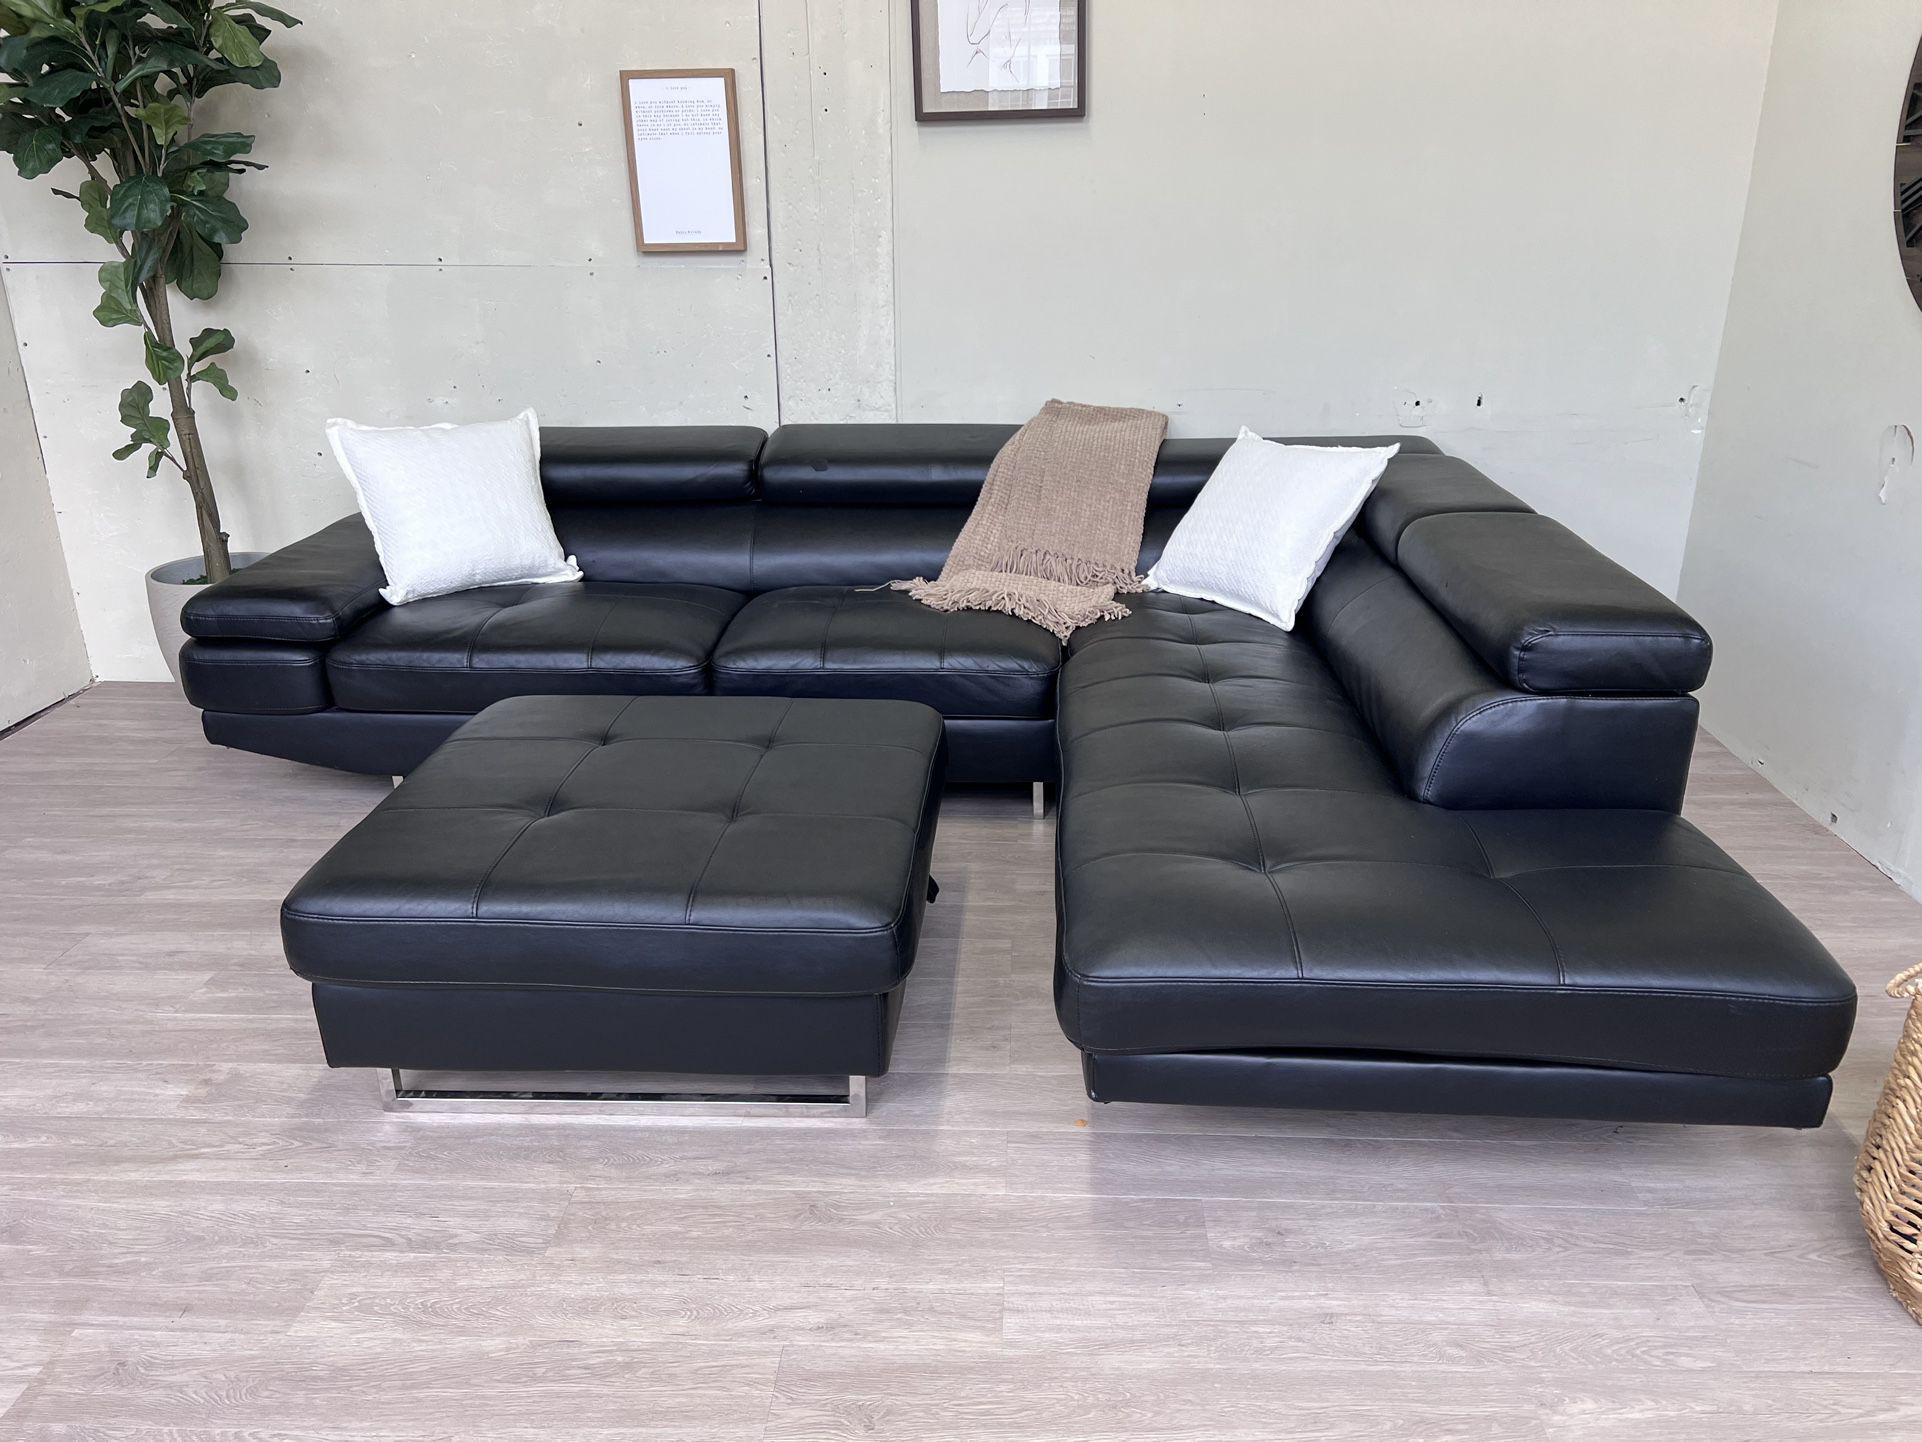 FREE DELIVERY! 🚚 - Bob’s Black Leather Tilting Headrests Sectional Couch with Chaise & Storage Ottoman